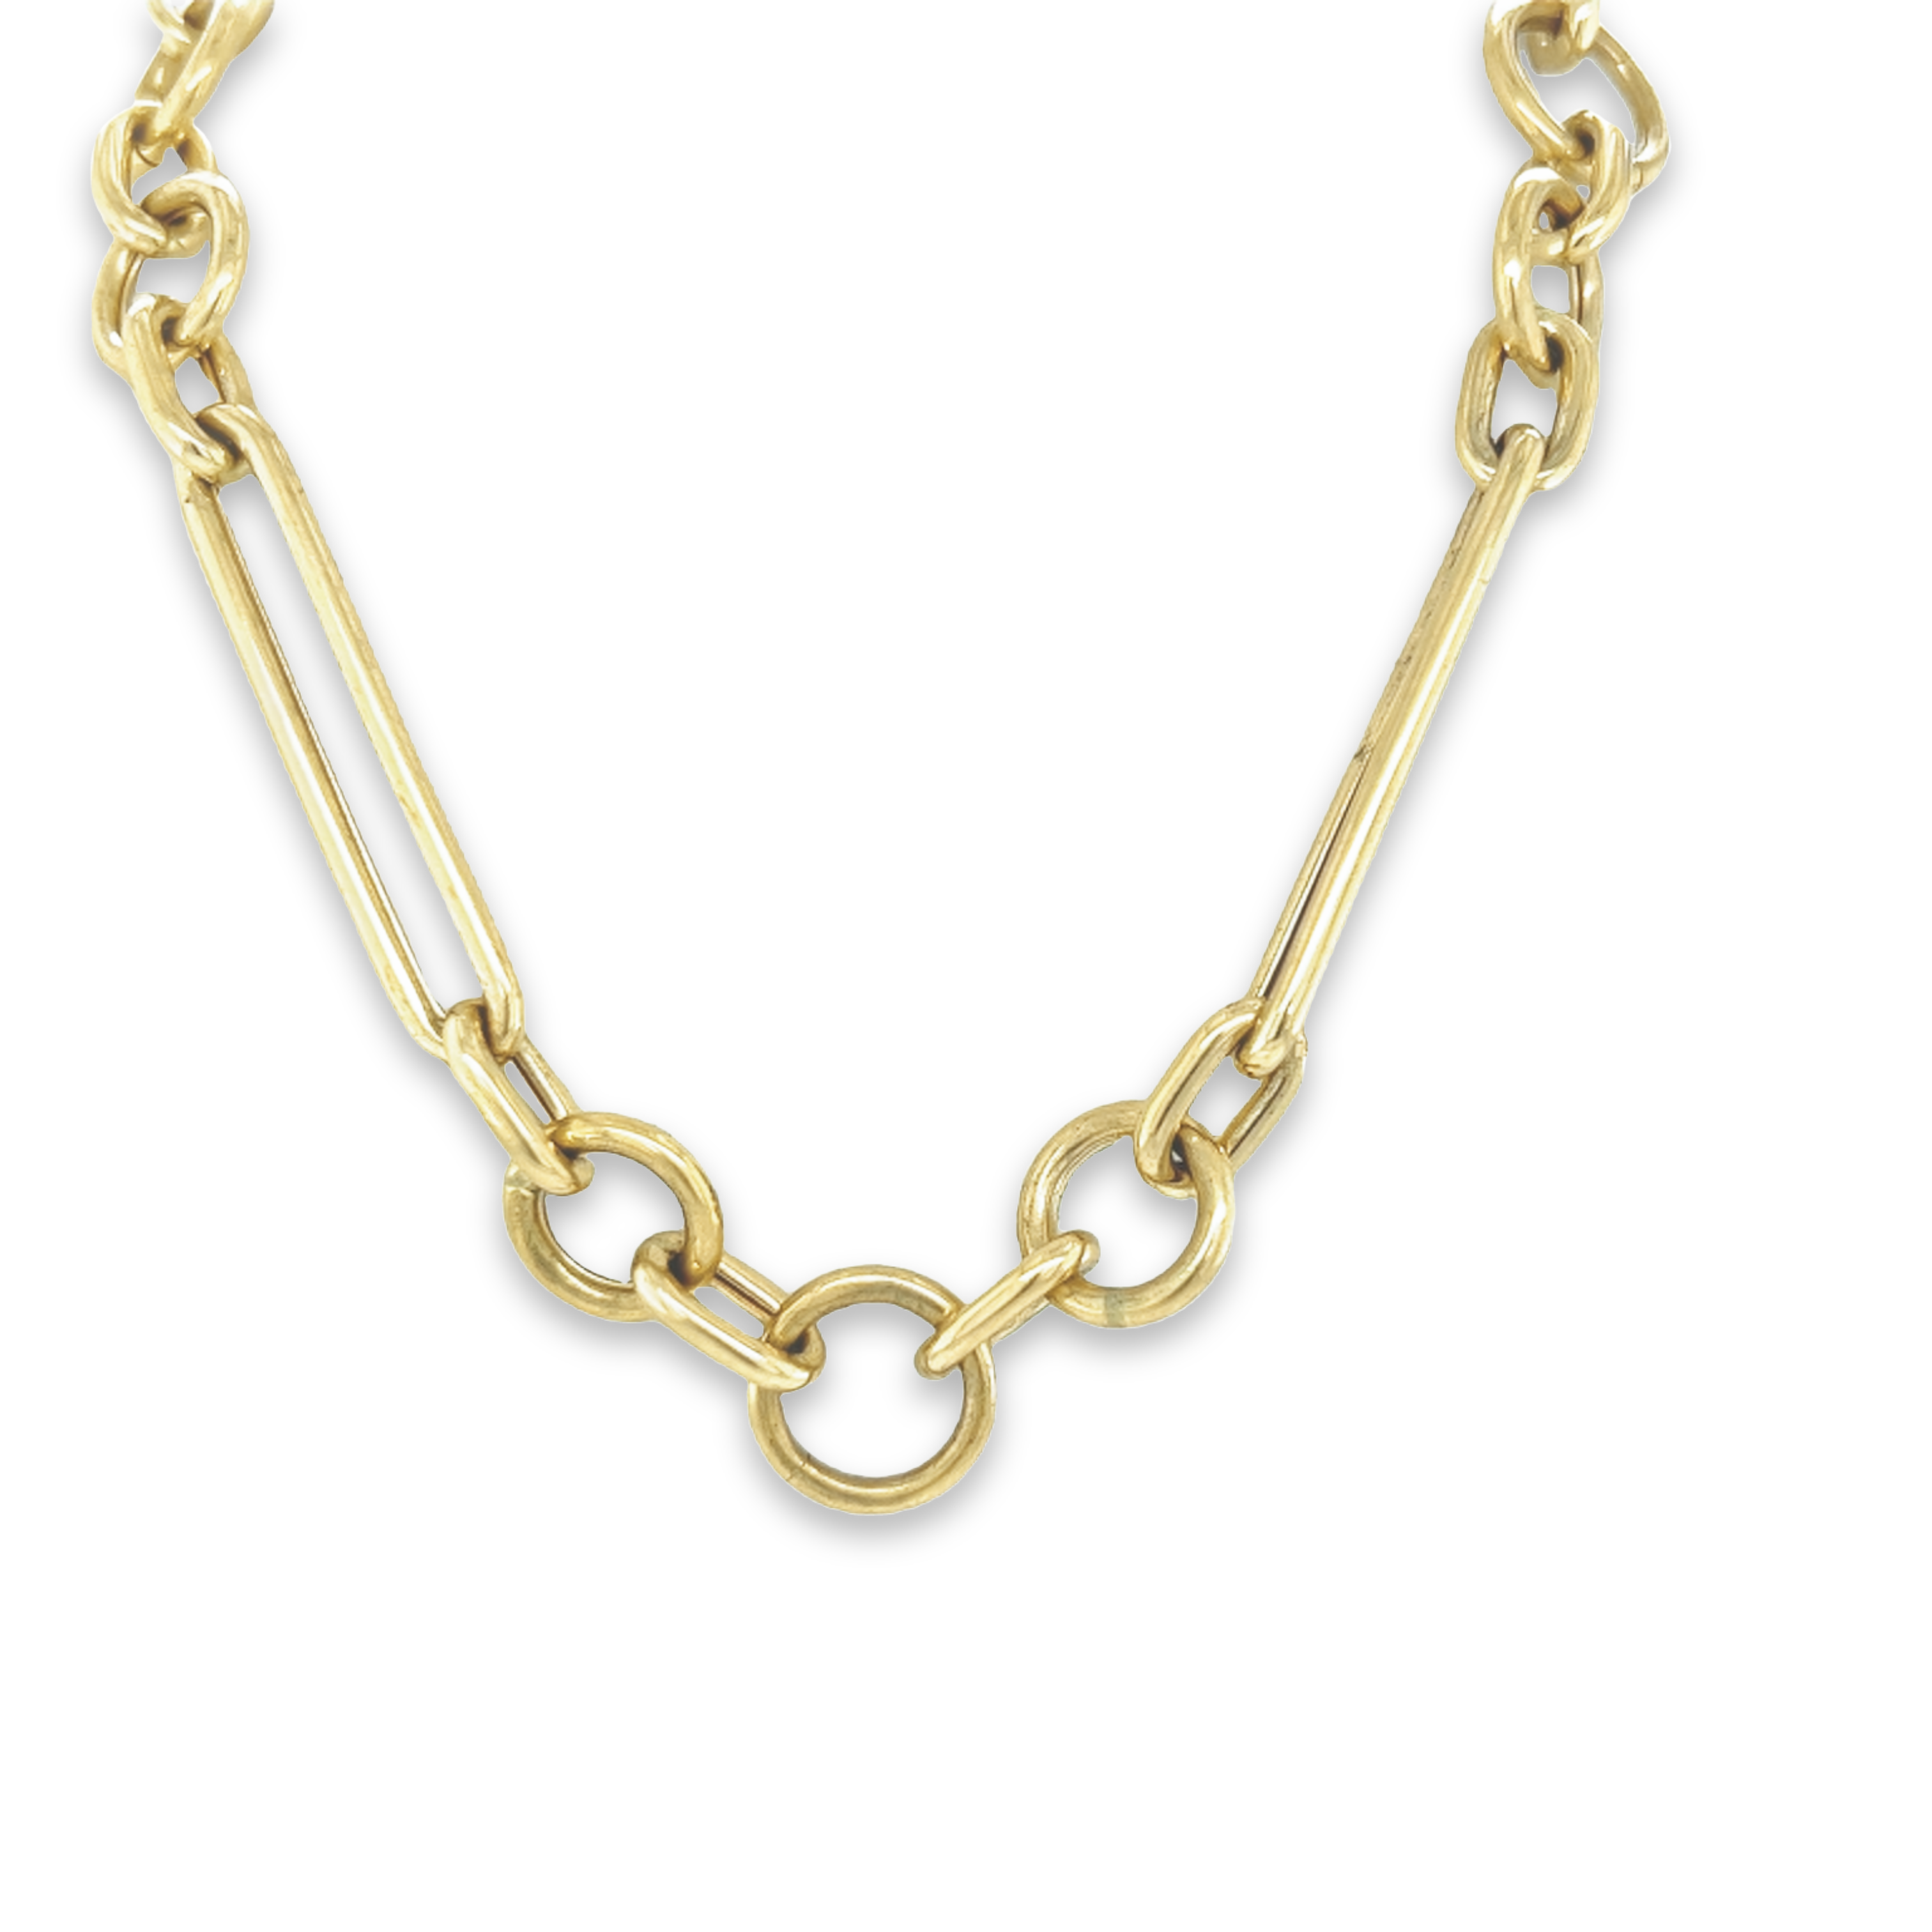 Featured image for “Chunky Chain with Multiple Charm Enhancers”